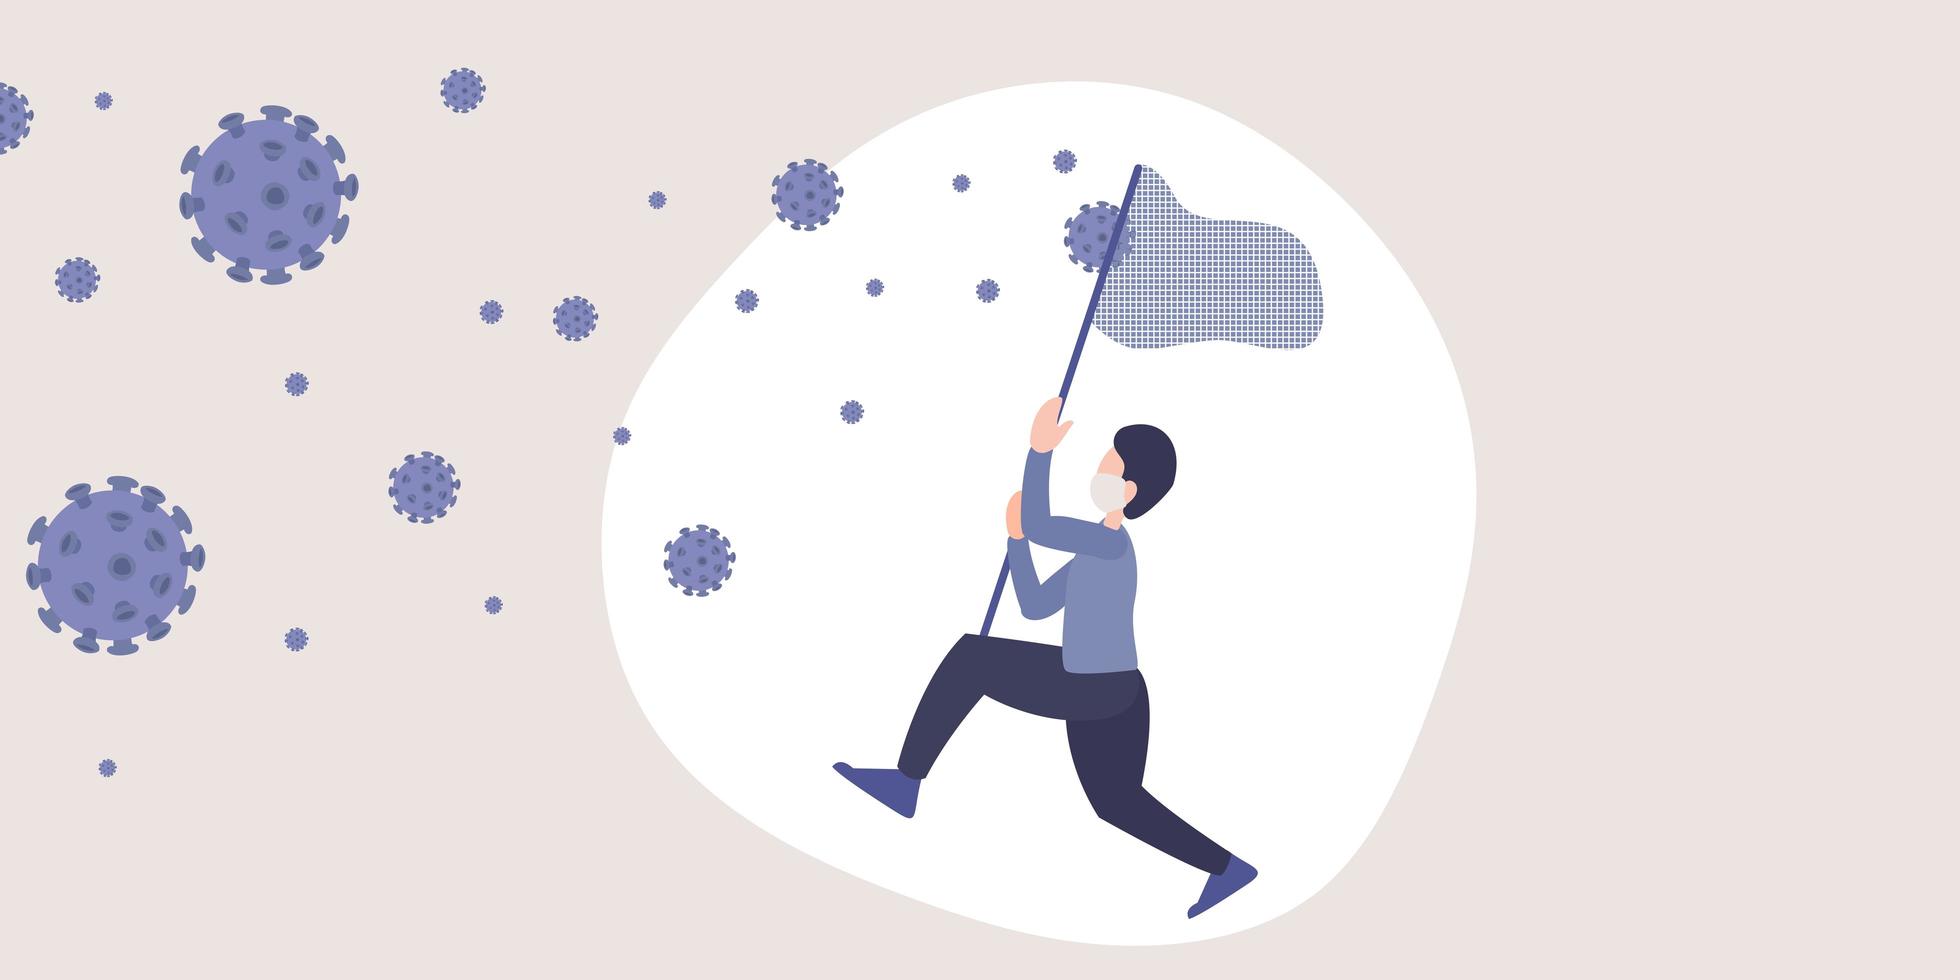 Coronavirus 2019-nCoV metaphor flat illustration. Vector of a man trying catch virus in the air with net stick.